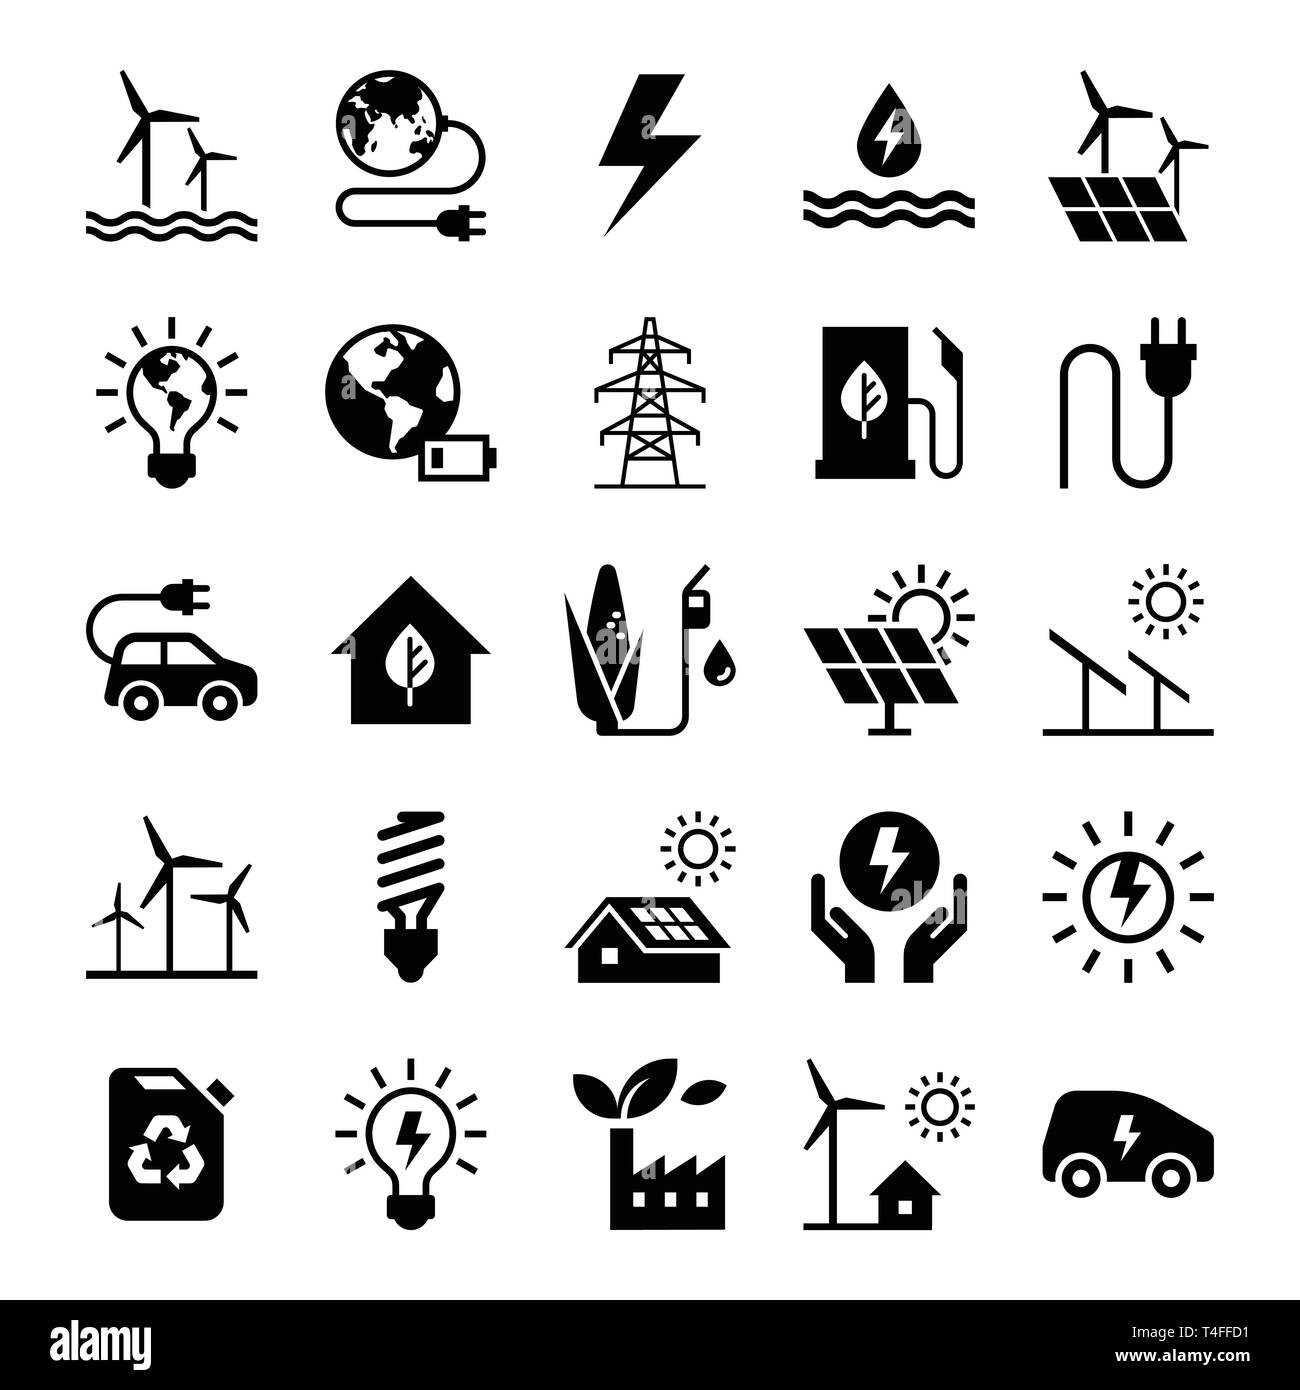 Monochrome illustrations of icons relating to the production and distribution of green energy, white background. Stock Vector